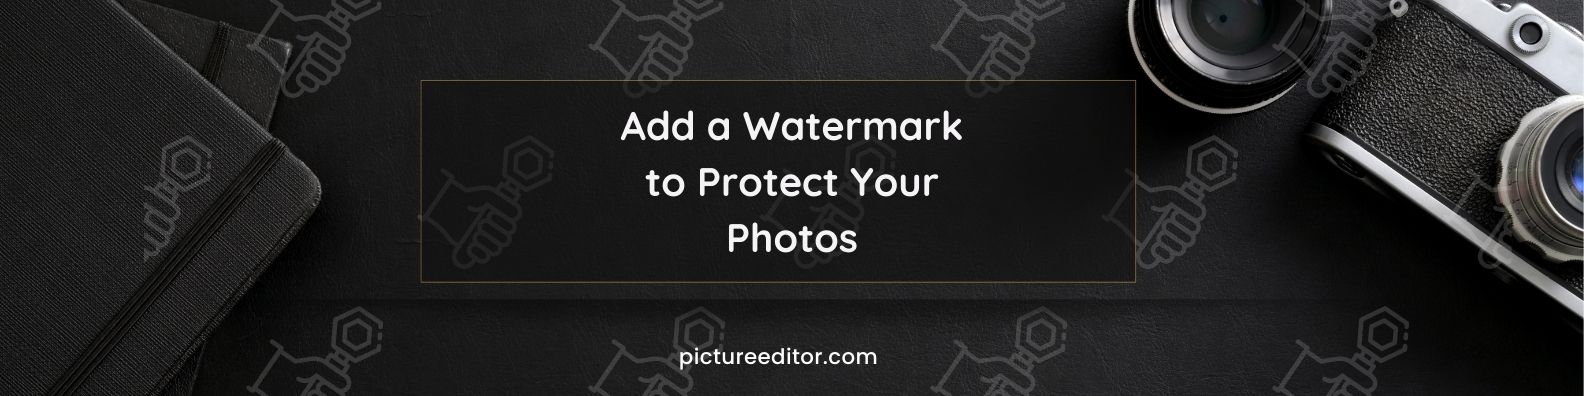 Add a Watermark to Protect Your Photos-new